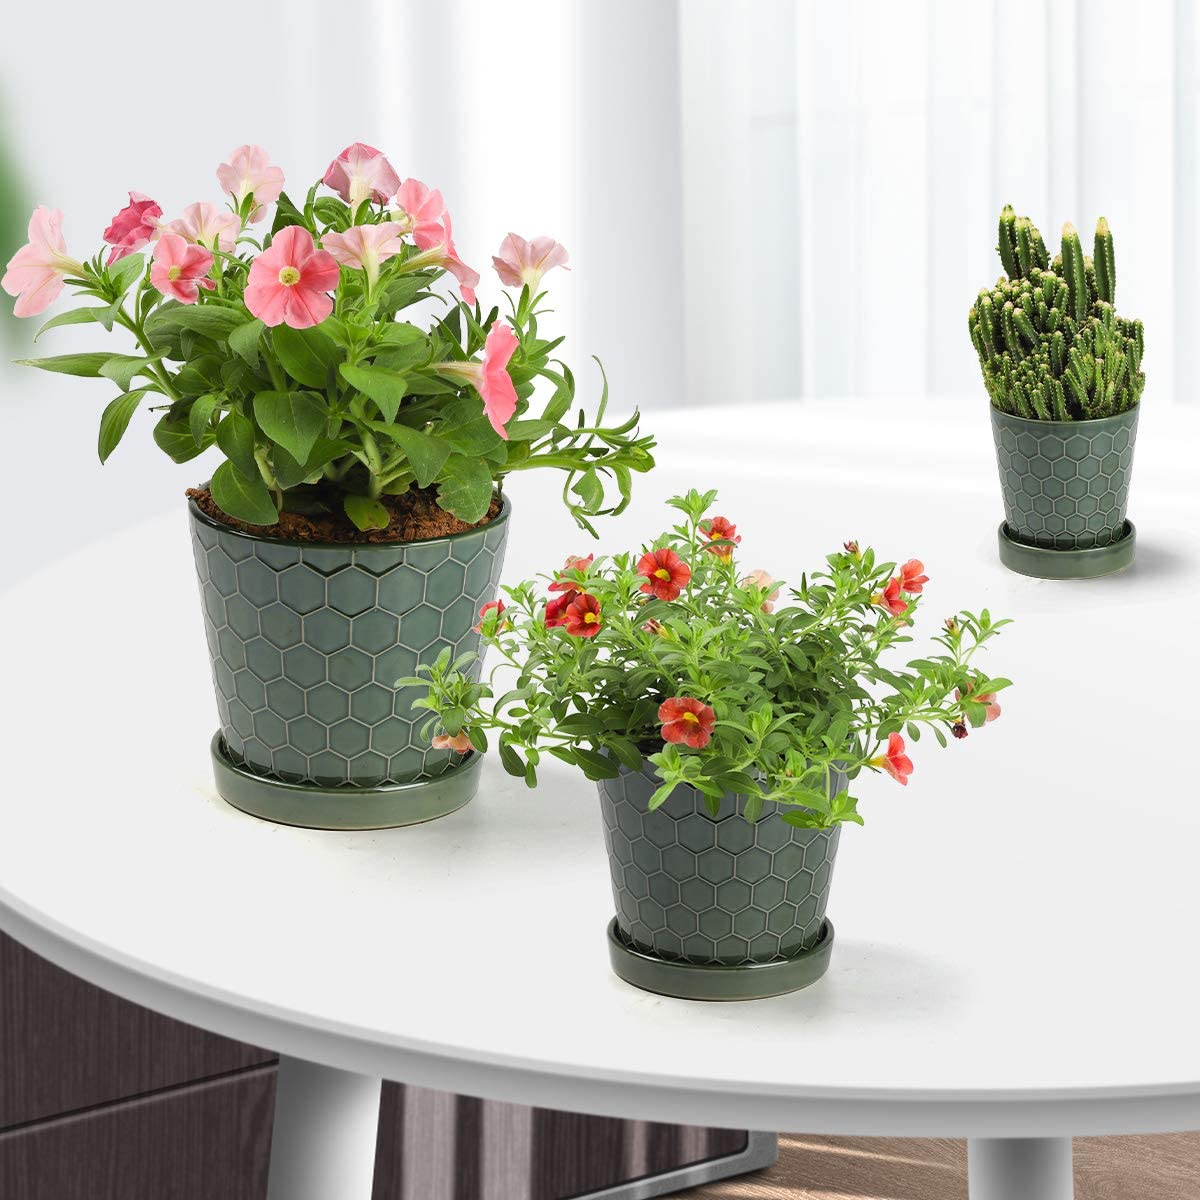 Spepla Flower Pots Set of 4, 4/5/6/7 Inch Plant Pot with Drainage